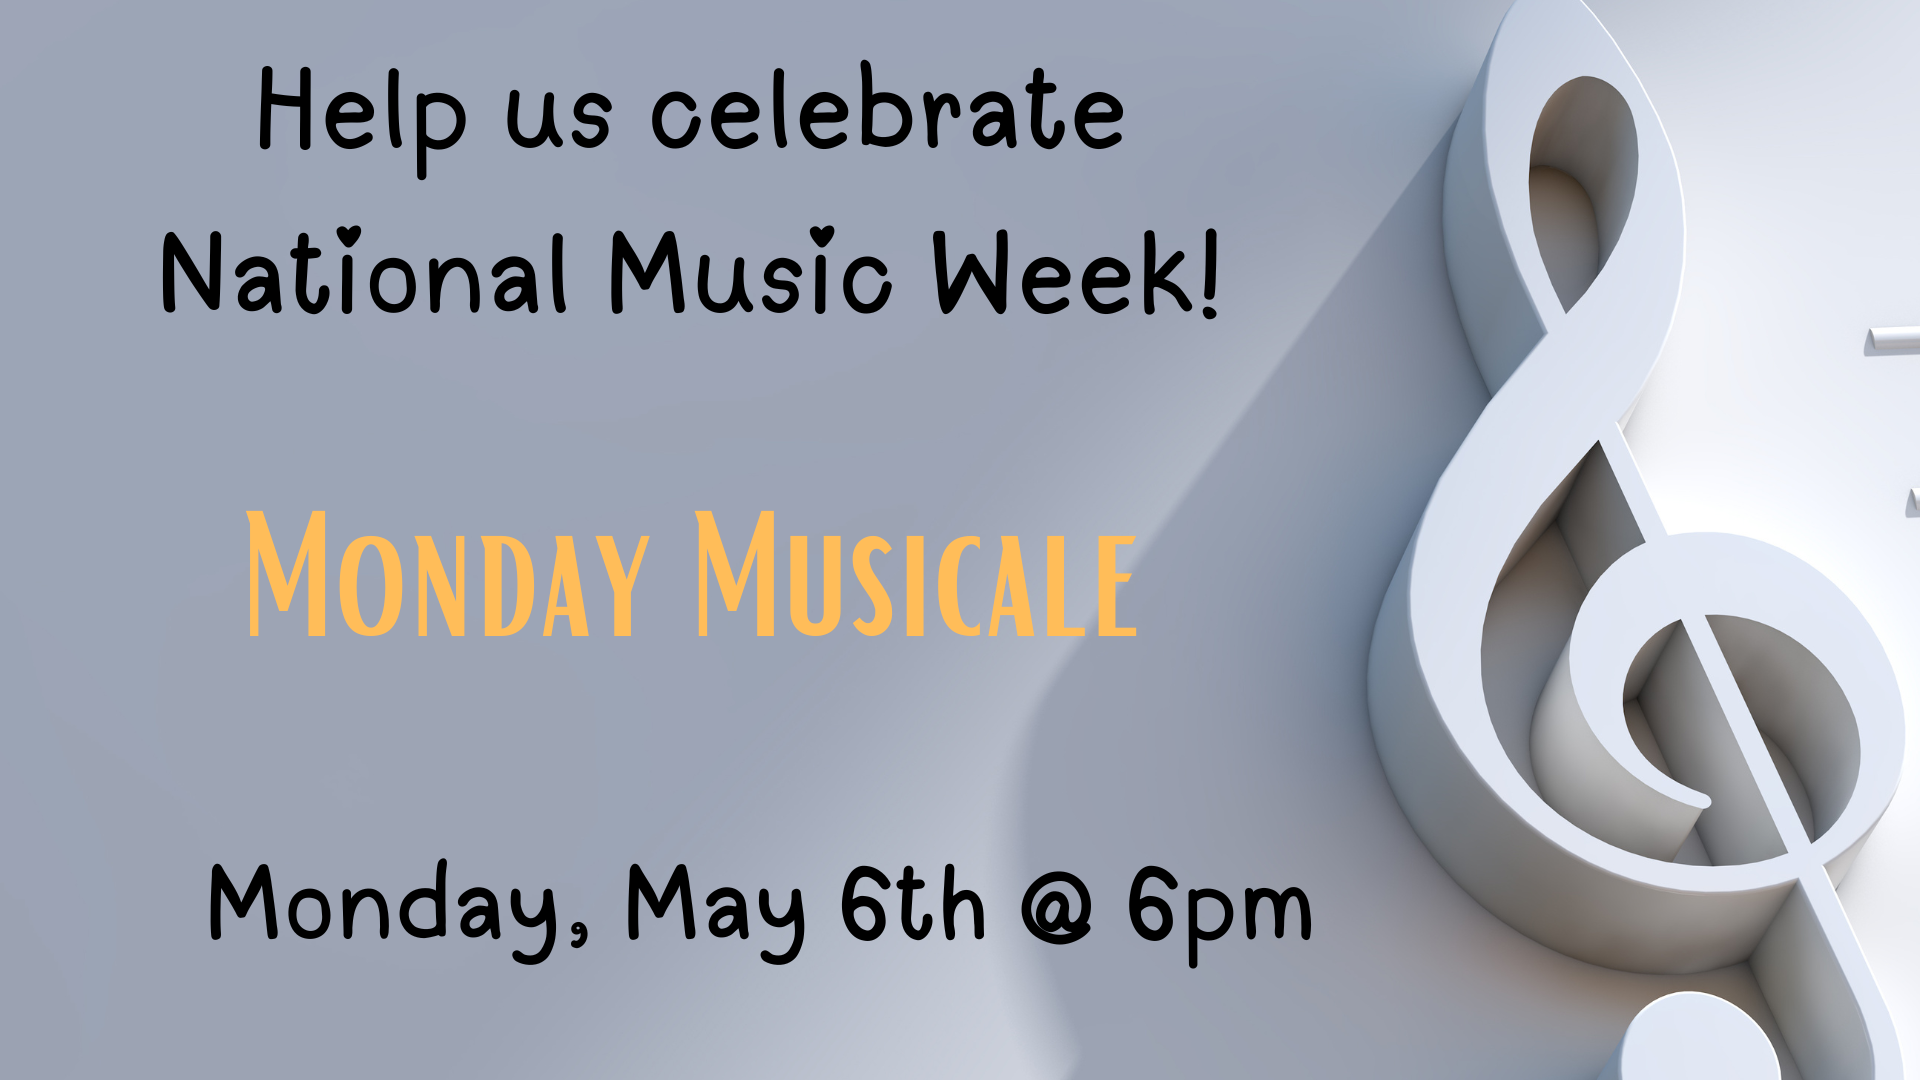 Monday Musicale concert, Monday, May 6 at 6:00 pm